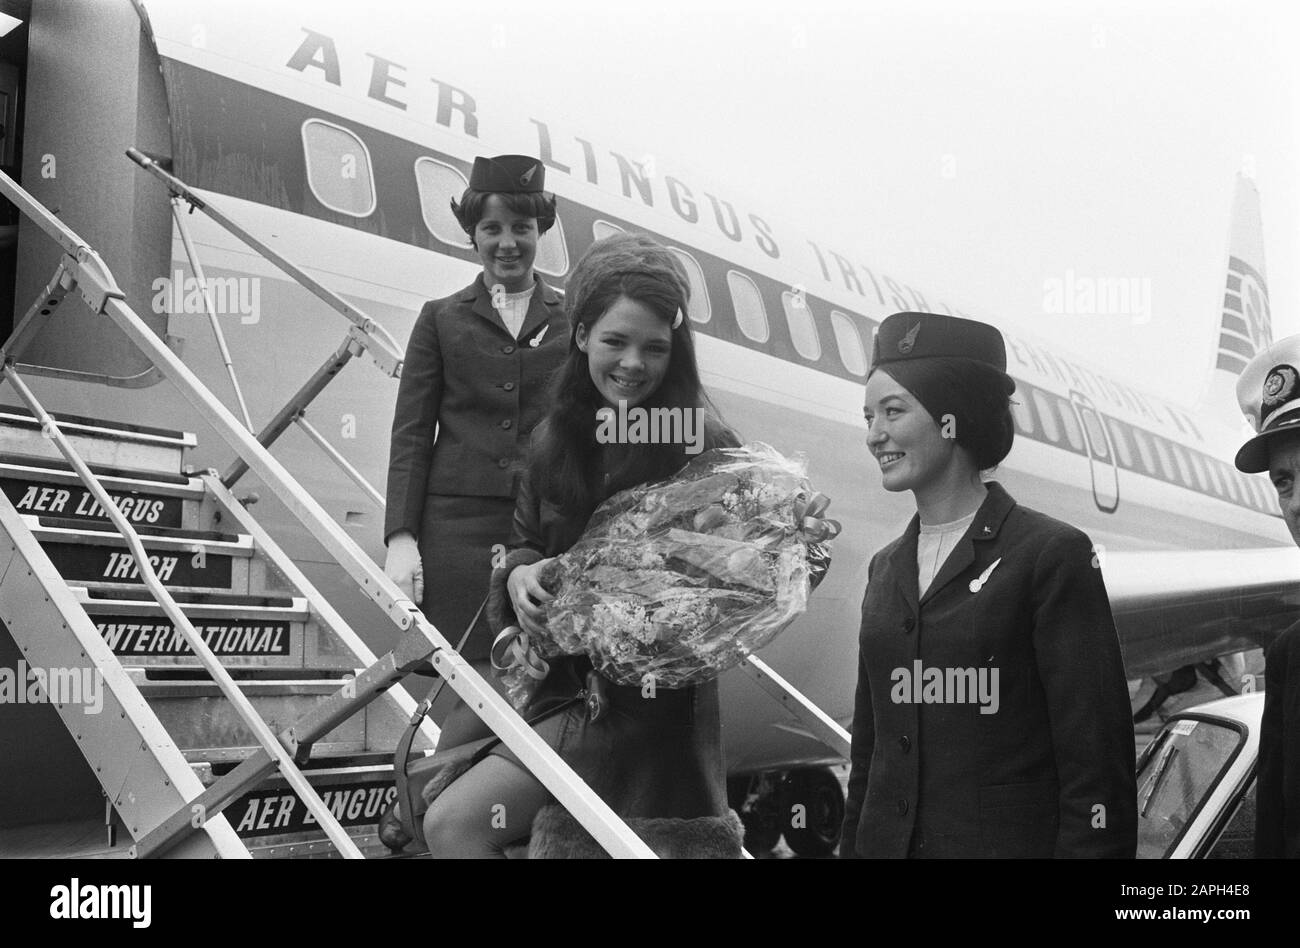 Dana, winner Song Contest departs for Schiphol Date: 23 March 1970 Location: Noord-Holland, Schiphol Keywords: SONG FESTIVES, winners Personal name: Dana Stock Photo